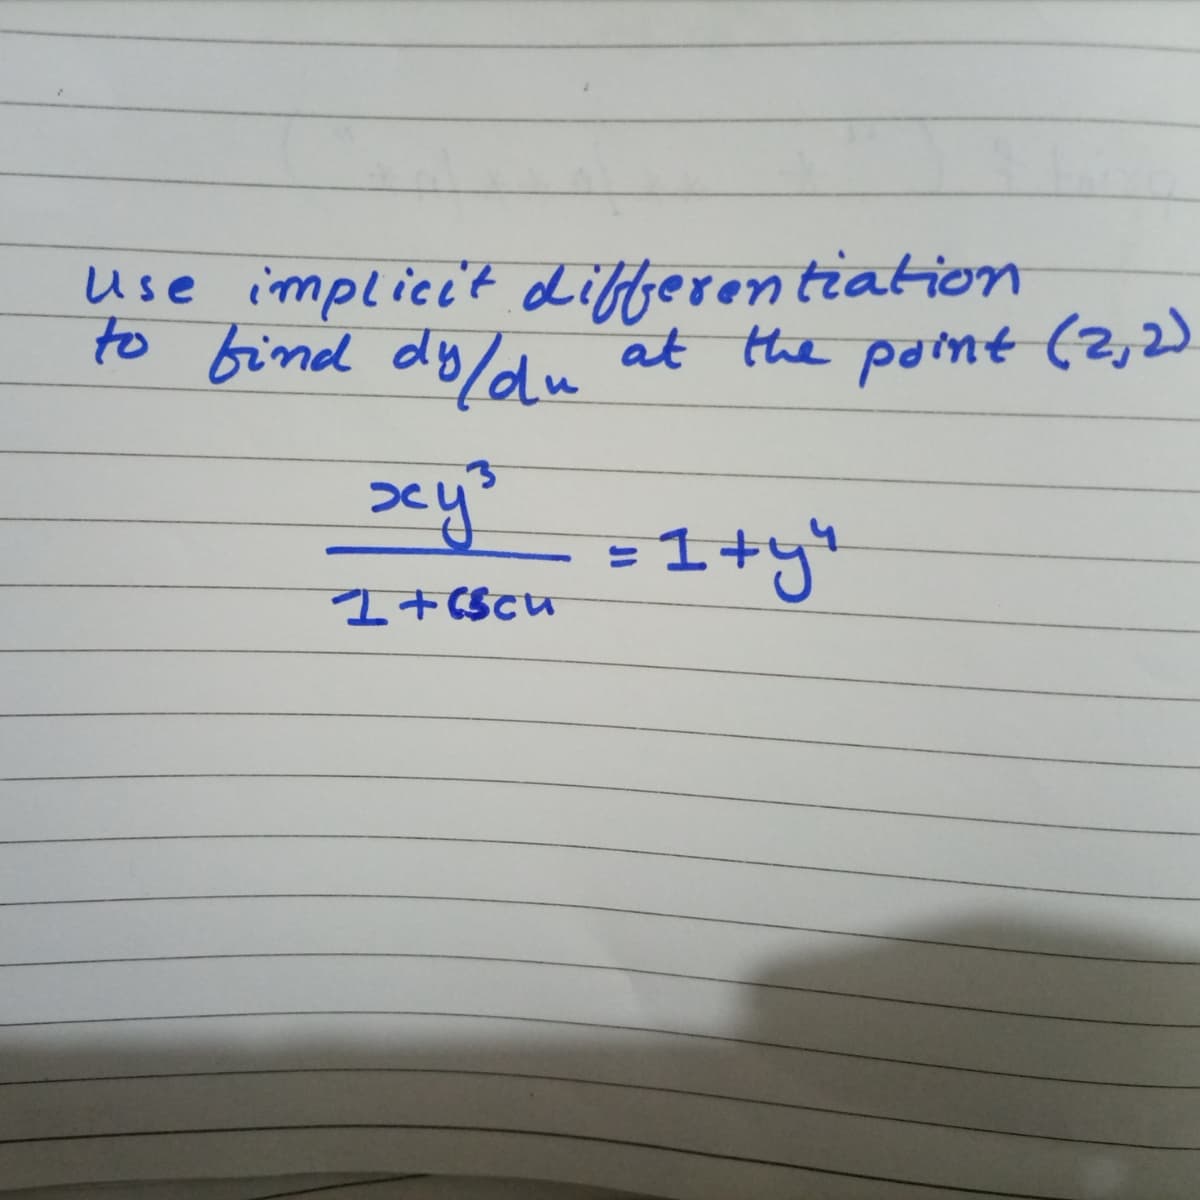 use implicit dilferen tiaton
to bind dyldlu a
at the point (2,2)
= 1+y*
